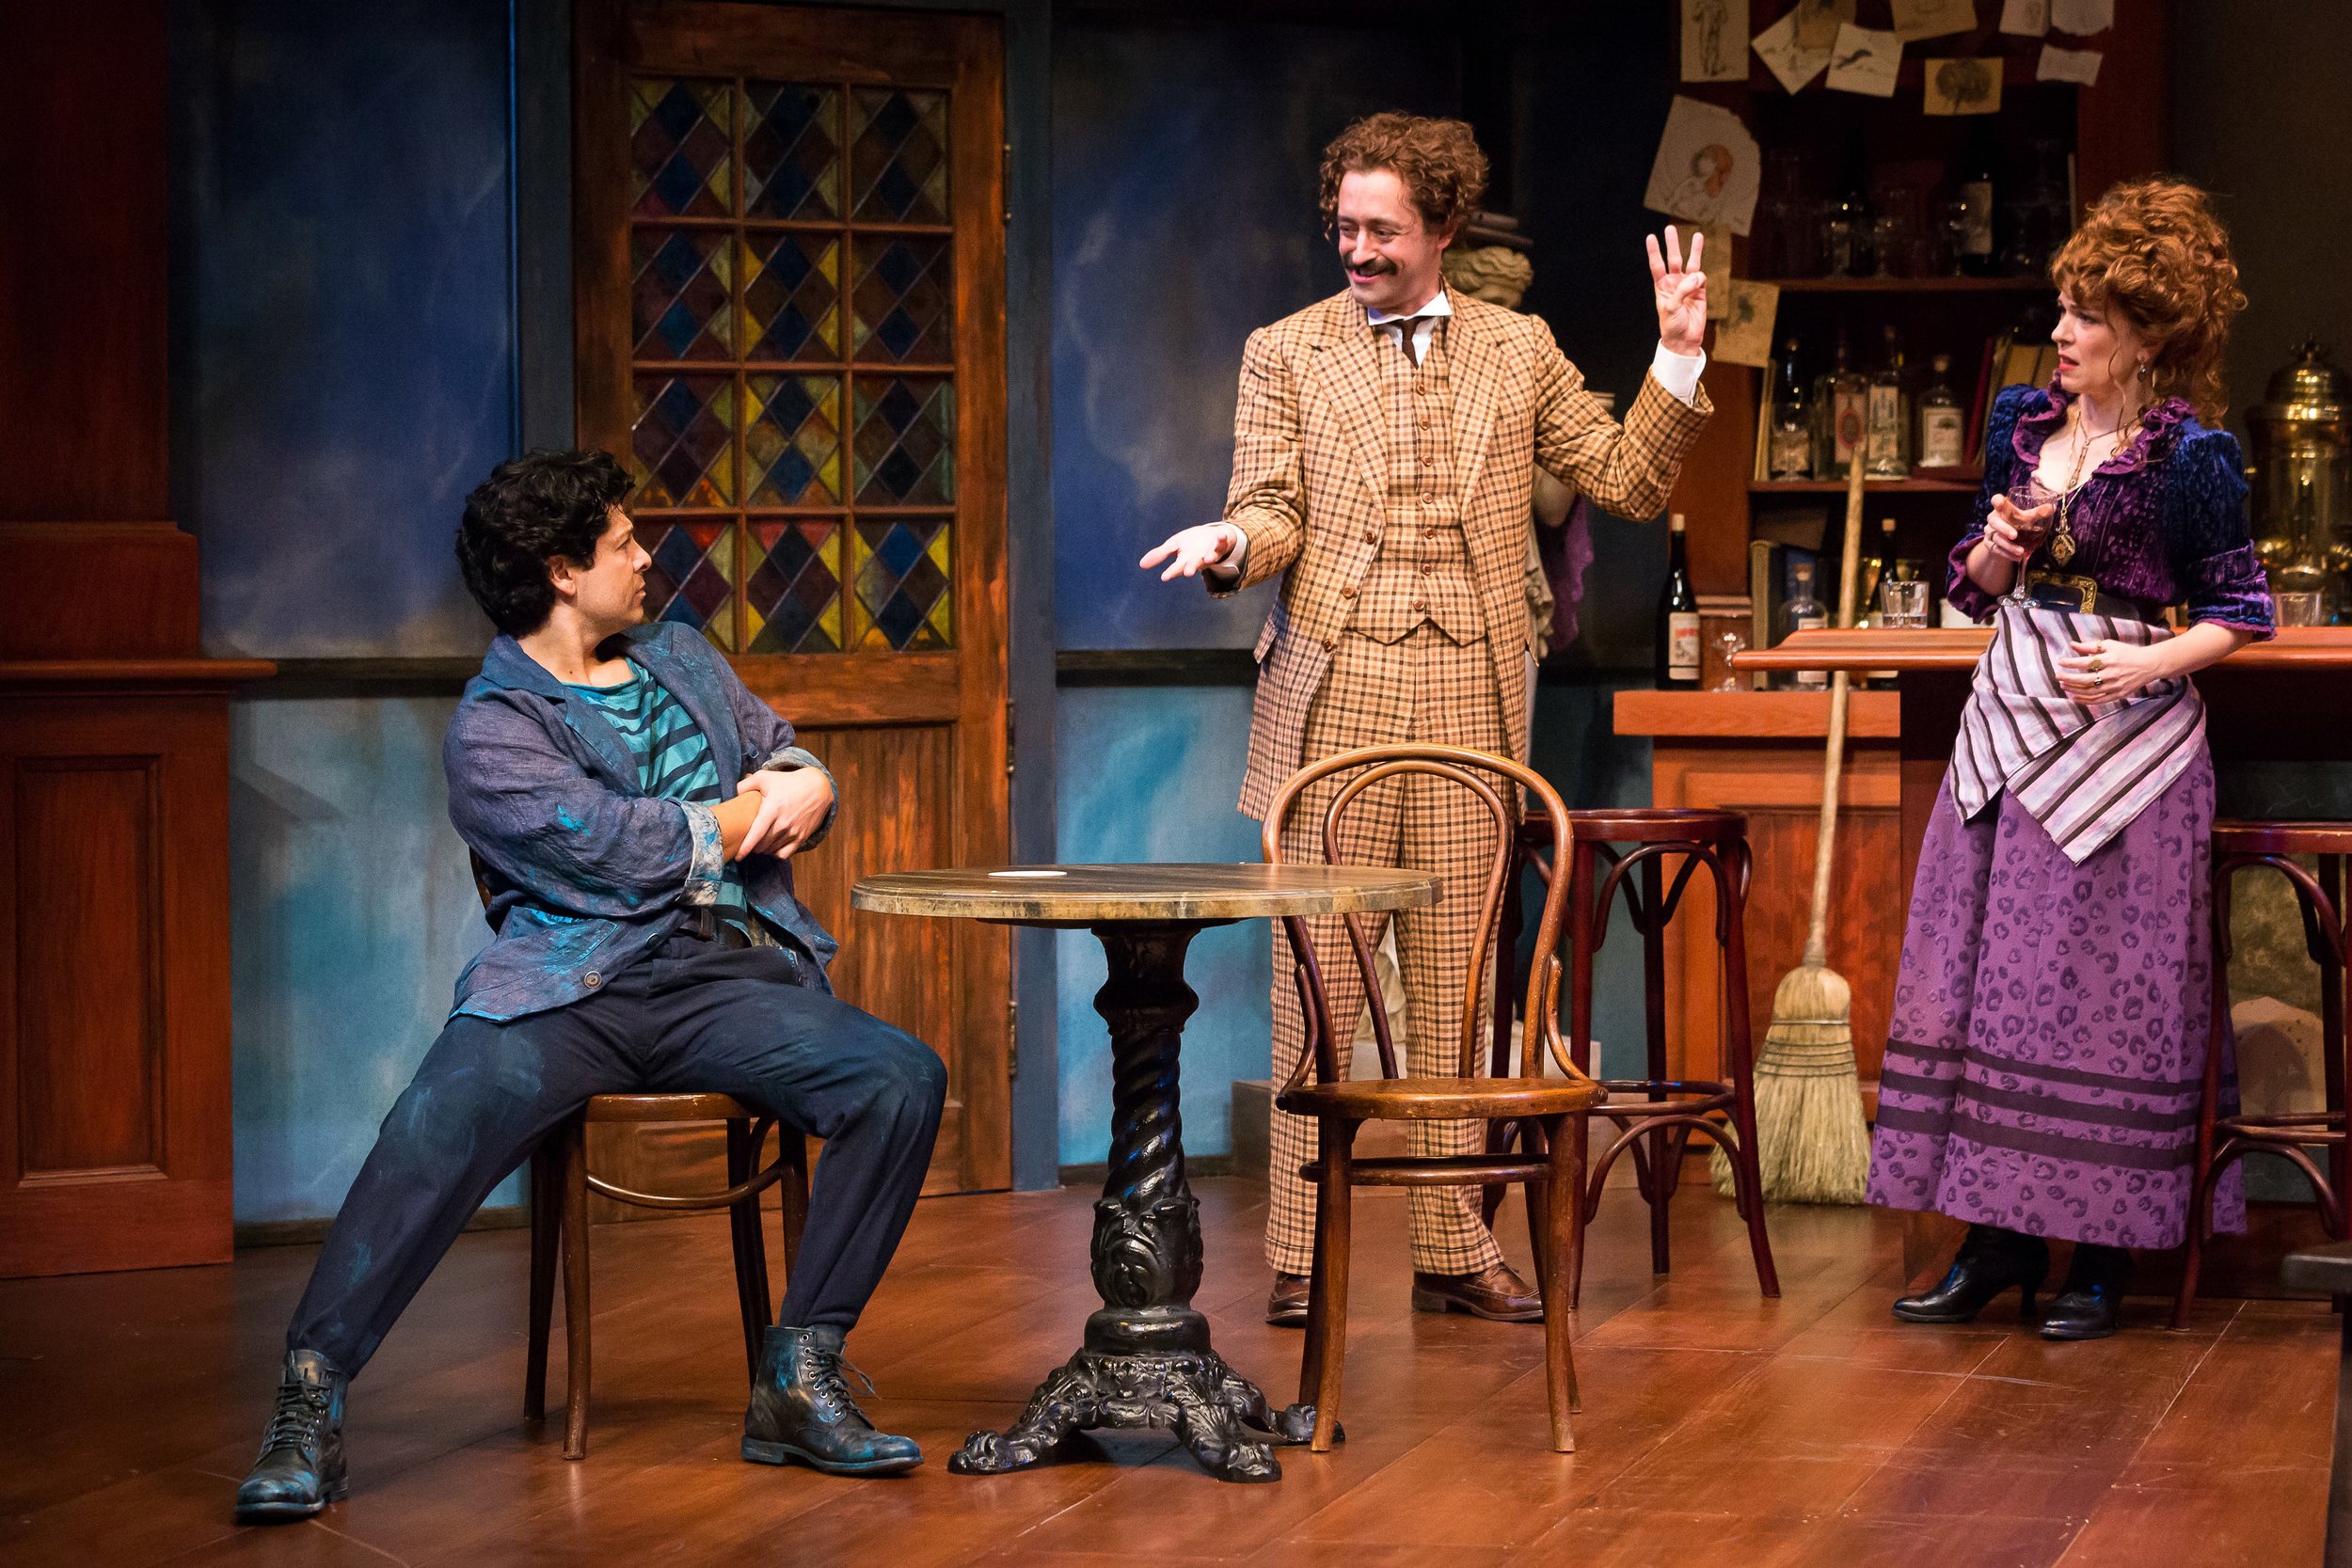 Joseph Castillo-Midyett as Pablo Picasso, Dylan Godwin as Albert Einstein, and Elizabeth Bunch as Germaine in the Alley Theatre’s production of Picasso at the Lapin Agile by Steve Martin. Directed by Sanford Robbins. Photo by Lynn Lane.